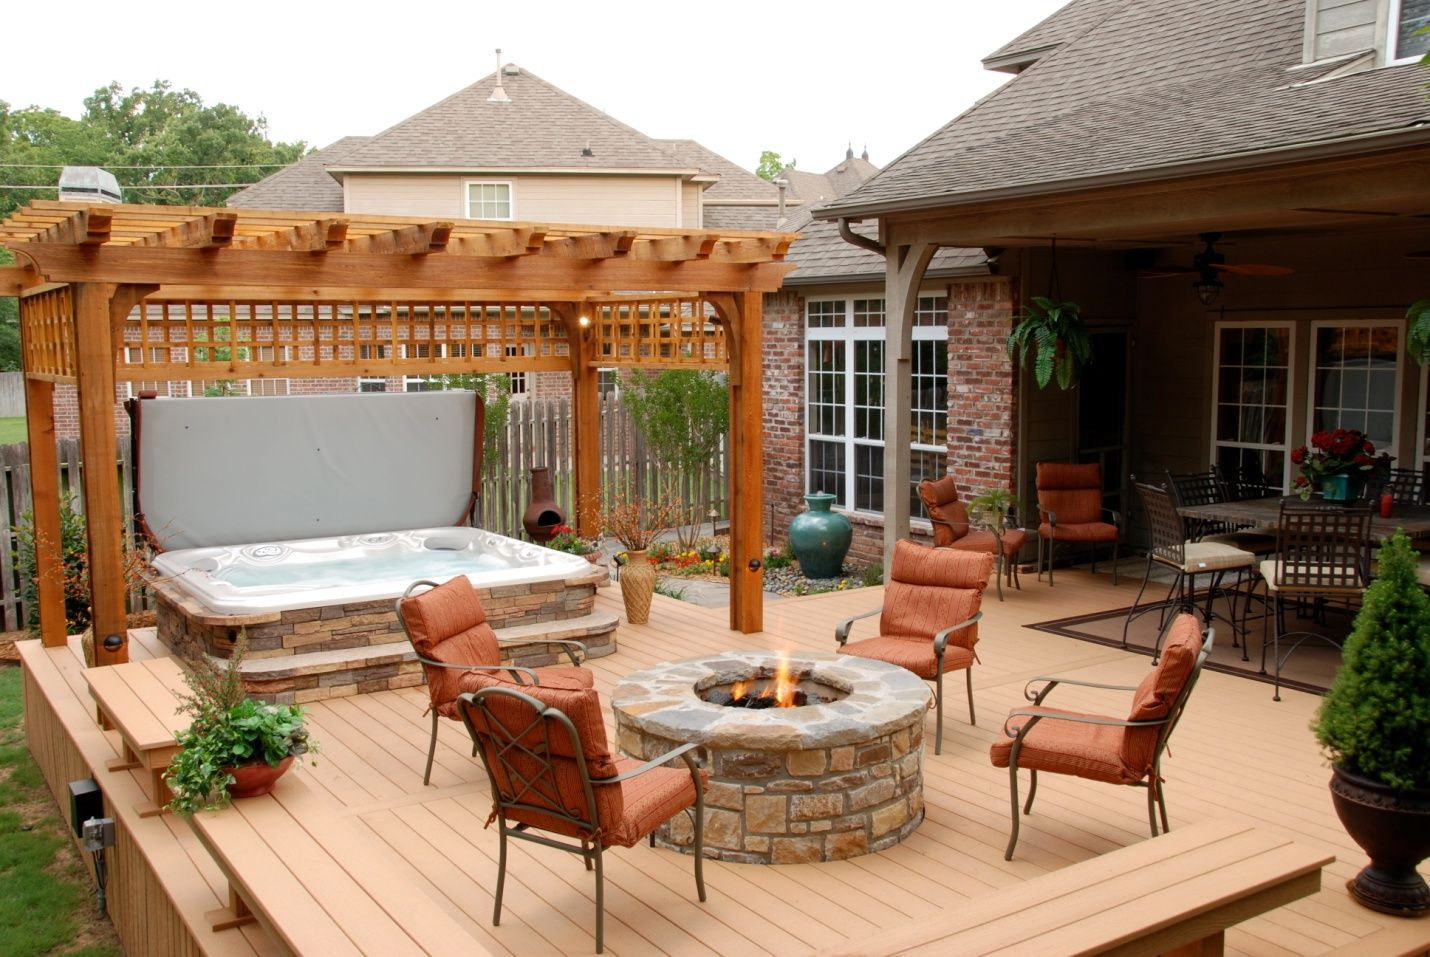 Hot Tub And Stone Firepit On Deck Like The Pergola Not Sure About regarding dimensions 1430 X 957